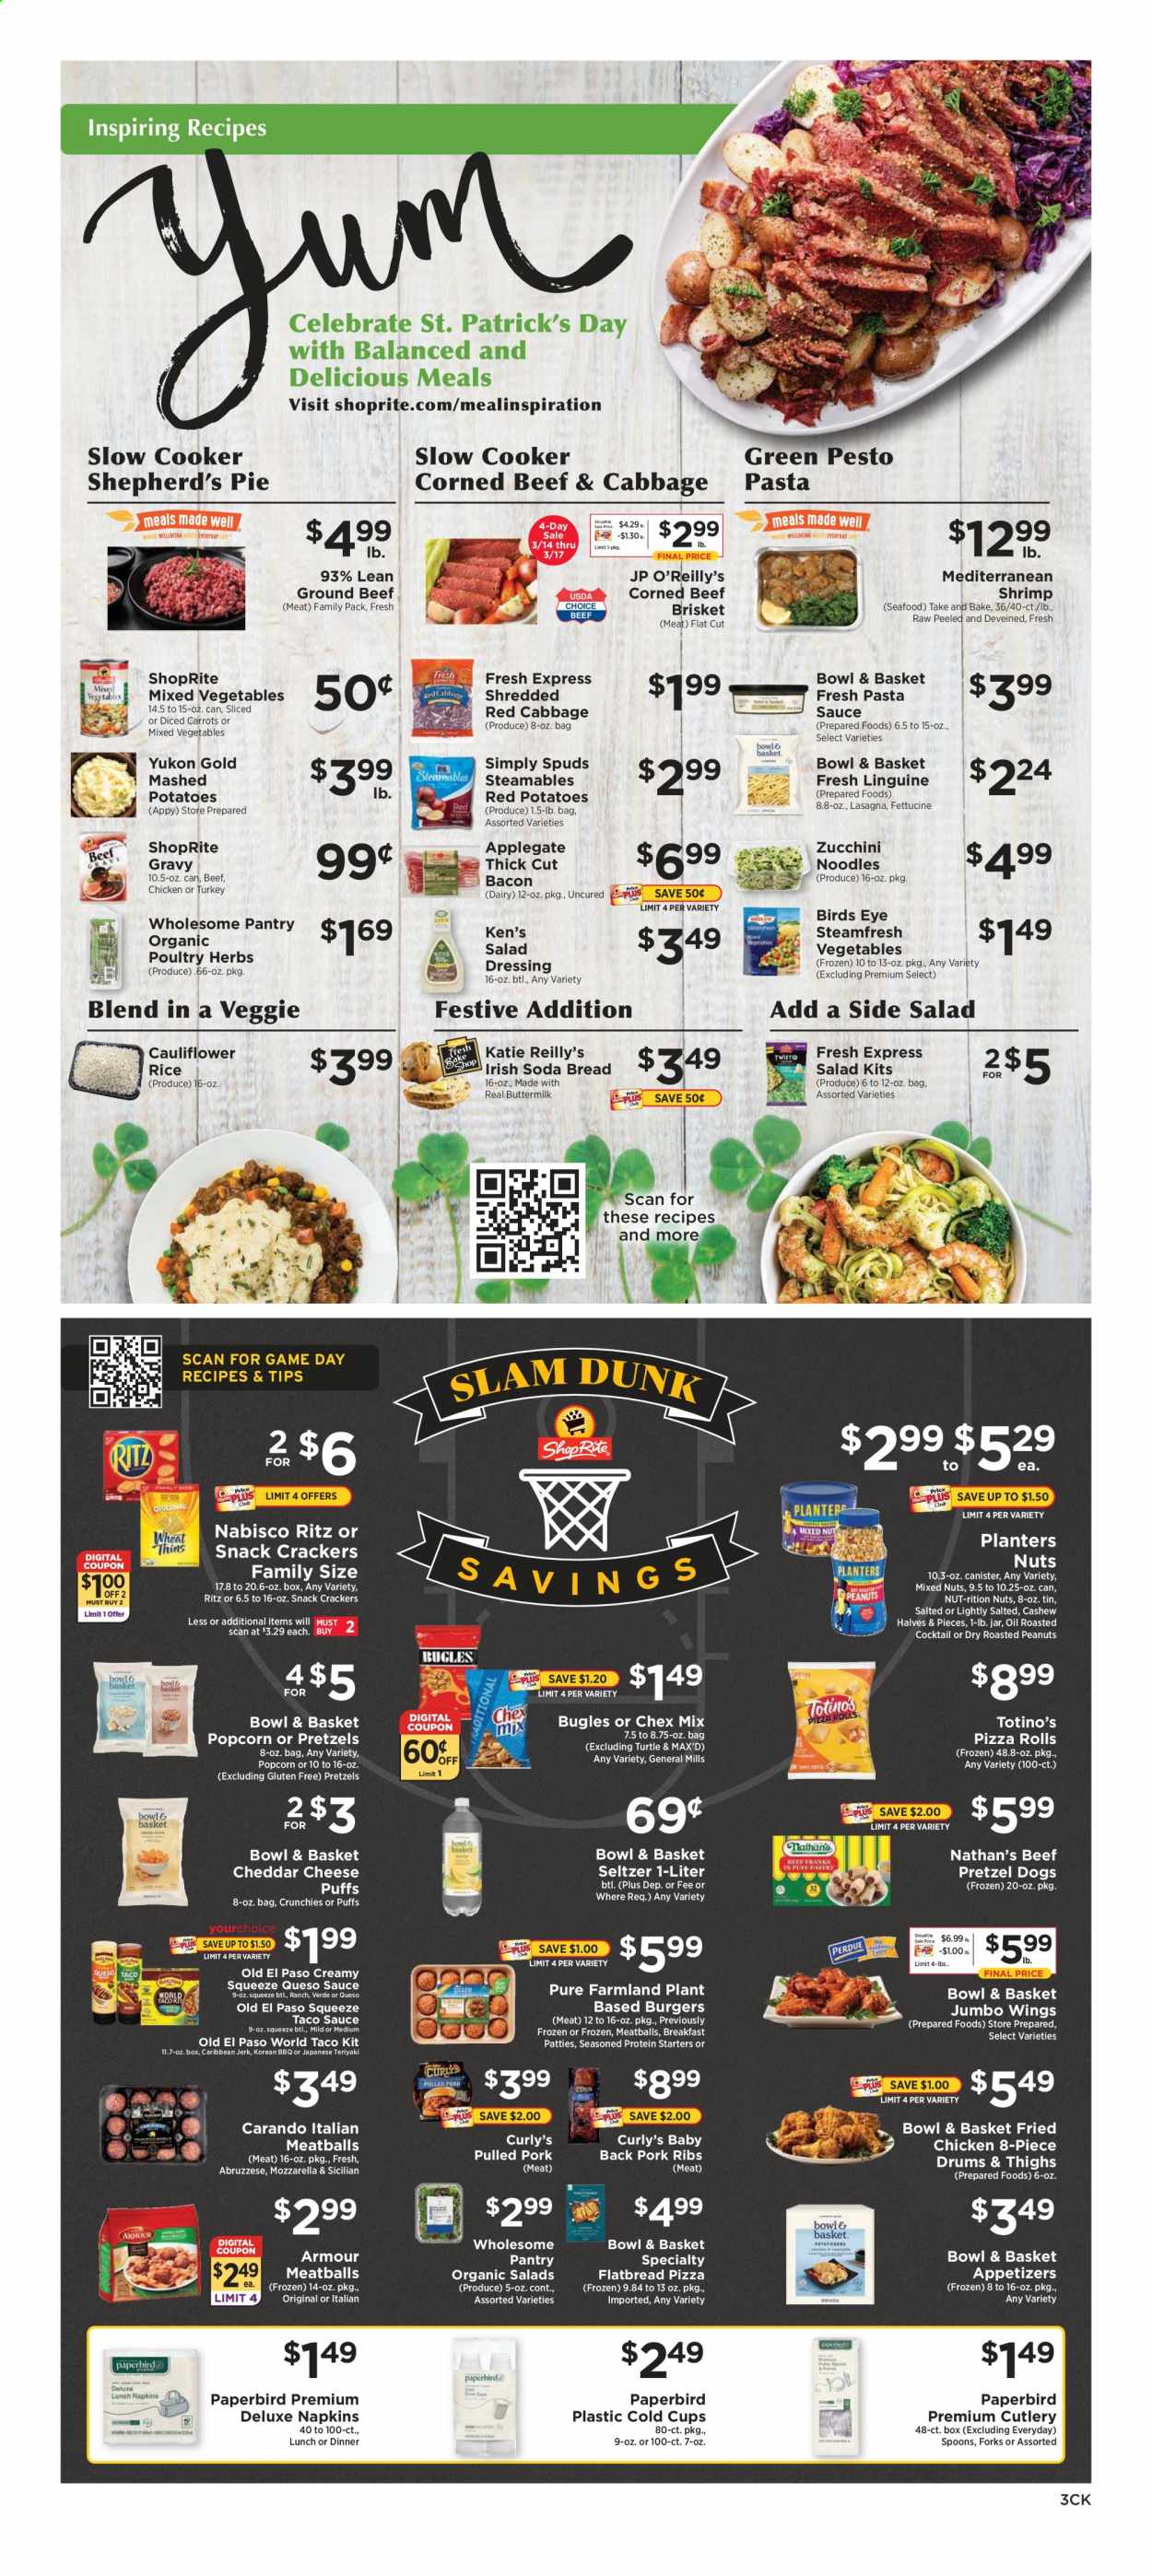 thumbnail - ShopRite Flyer - 03/14/2021 - 03/20/2021 - Sales products - bread, pretzels, pizza rolls, Old El Paso, soda bread, flatbread, pie, seafood, shrimps, mashed potatoes, pizza, meatballs, hamburger, sauce, fried chicken, Bird's Eye, lasagna meal, Bowl & Basket, bacon, mozzarella, cheddar, cheese, carrots, mixed vegetables, zucchini, crackers, RITZ, snack, popcorn, Chex Mix, rice, noodles, herbs, salad dressing, taco sauce, pesto, pasta sauce, dressing, teriyaki sauce, oil, cashews, roasted peanuts, peanuts, mixed nuts, Planters, seltzer water, beef meat, corned beef, ground beef, beef brisket, pork meat, pork ribs, pork back ribs, pulled pork, napkins, spoon, cup, bowl, jar. Page 3.